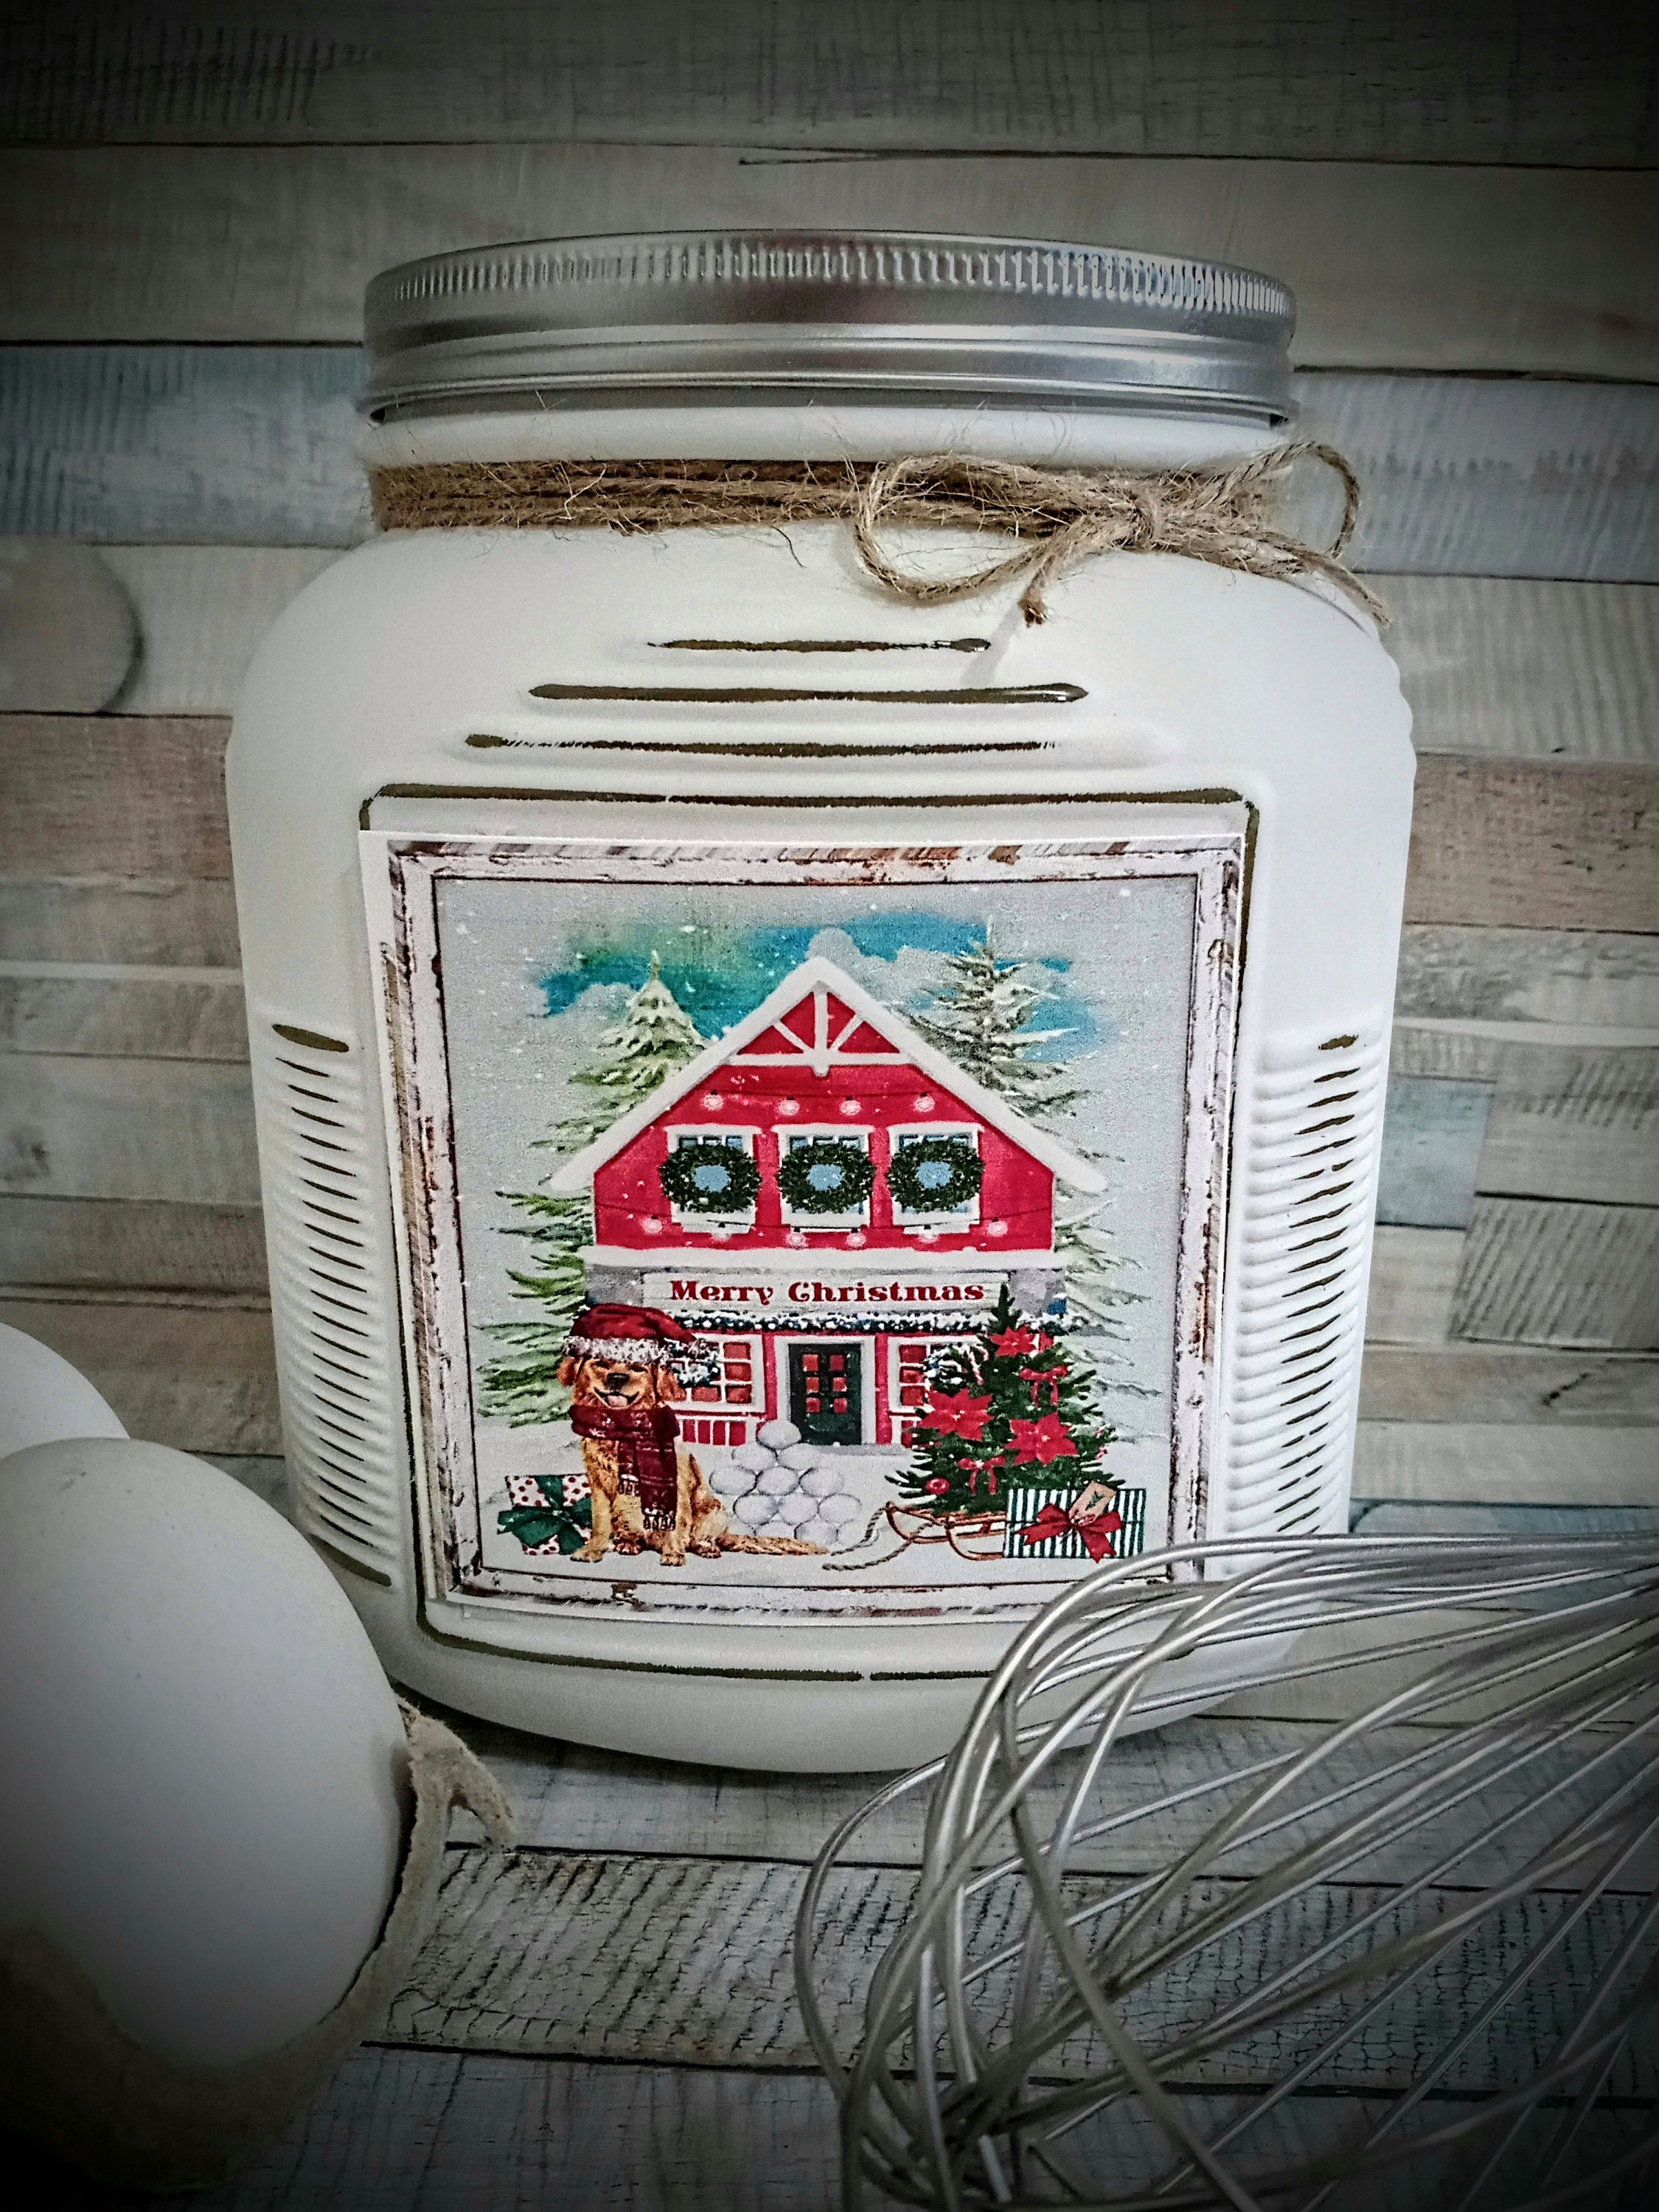 Kovot White Vintage Farmhouse Cookie Jar Airtight Food Storage Container with Lid for Cookies Biscuits Baked Treats Snacks Gift for Housewarming Birth